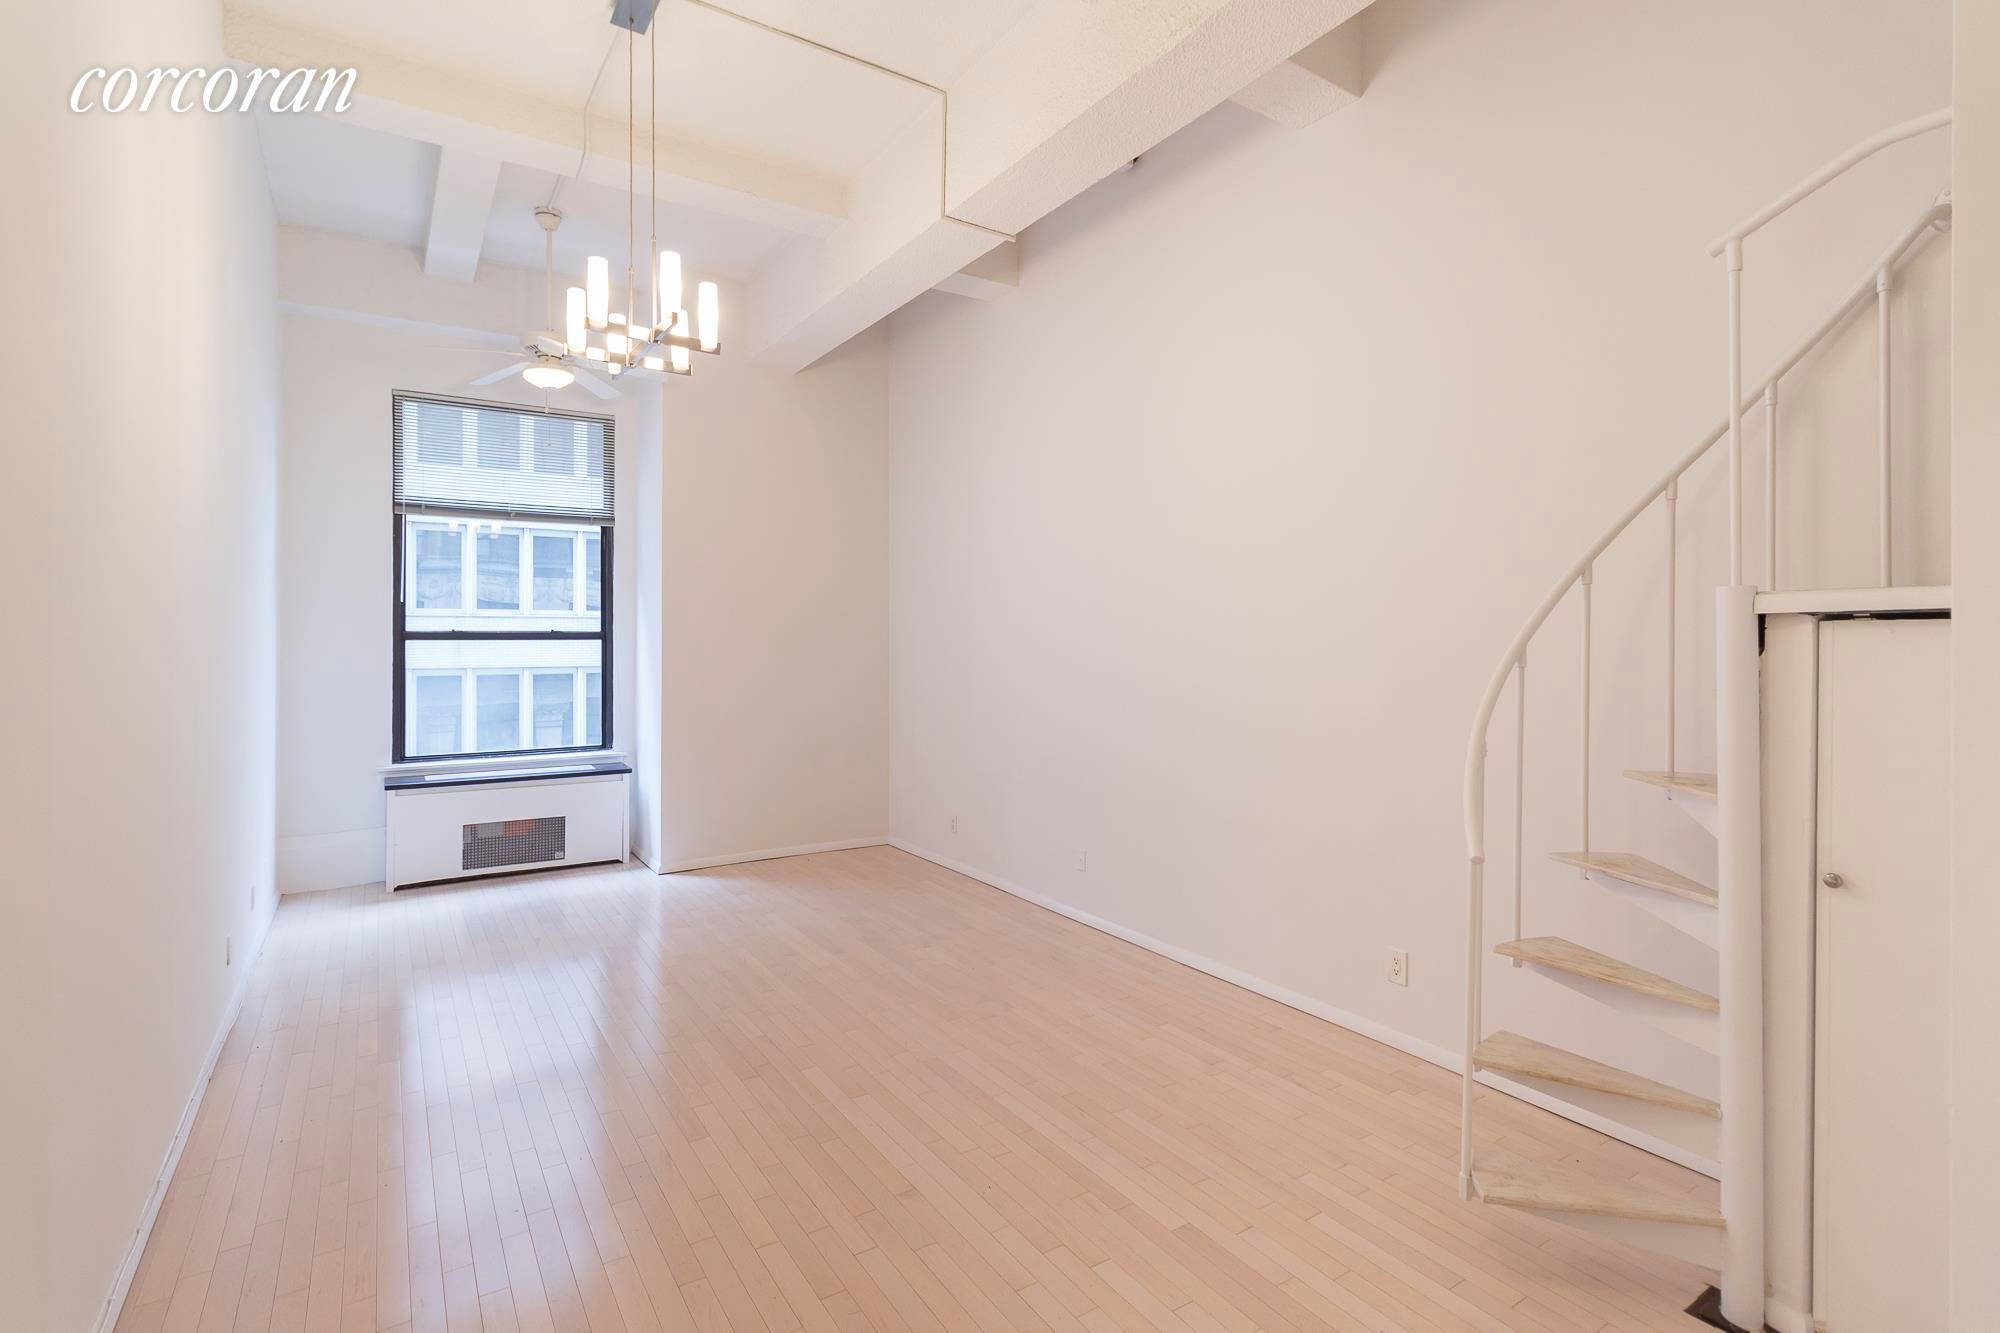 Unlimited subletting after 2 years of ownership Apartment 3D at 244 Madison Ave is a studio loft in excellent condition with an incredible amount of space, scale and storage.